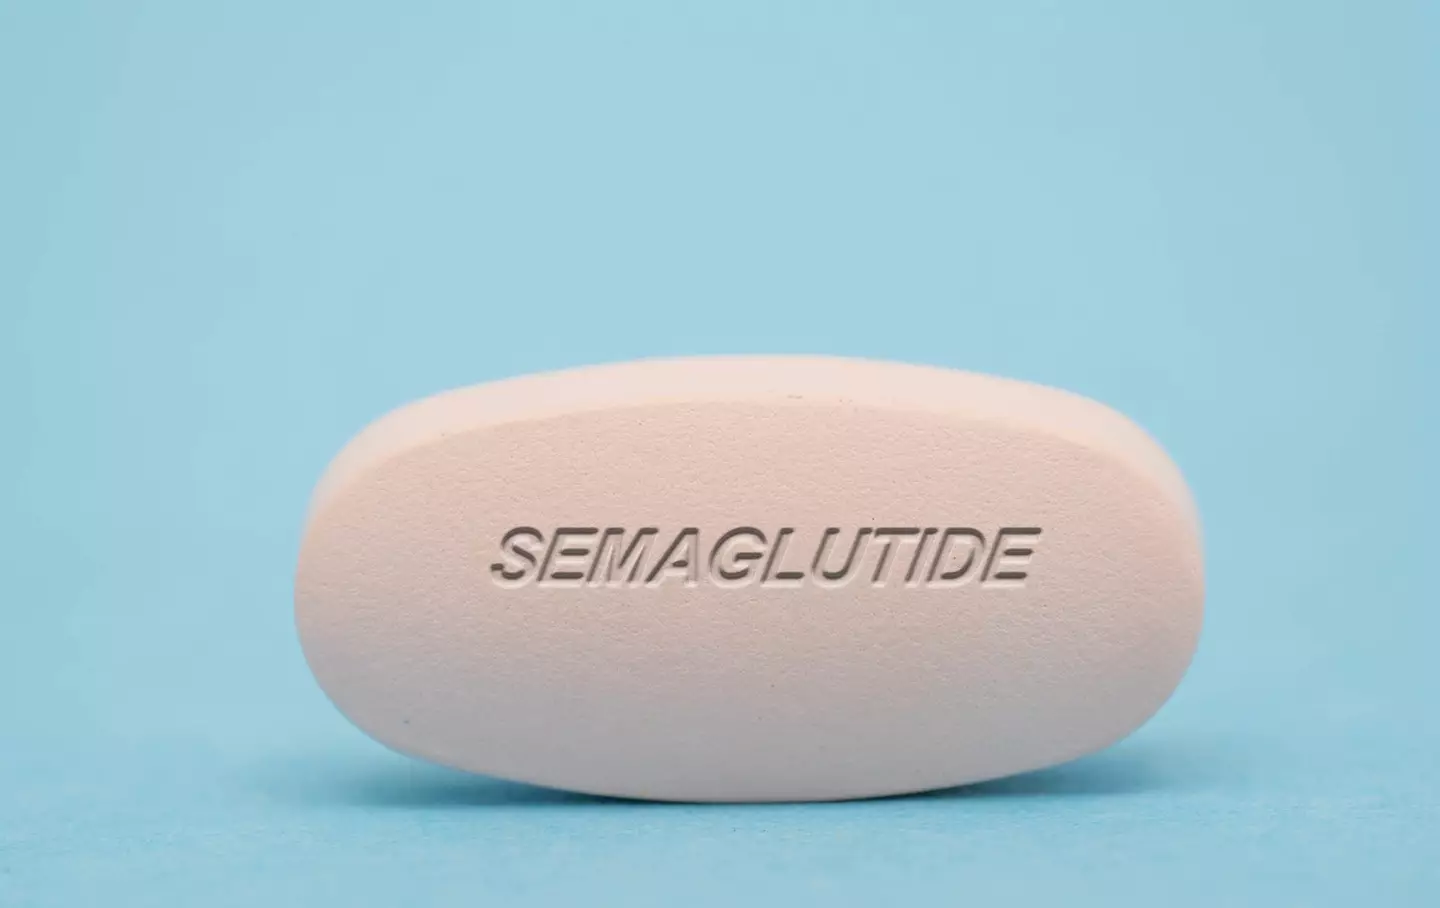 Semaglutide is the active ingredient in Ozempic. (WLADIMIR BULGAR/SCIENCE PHOTO LIBRARY / Getty Images)